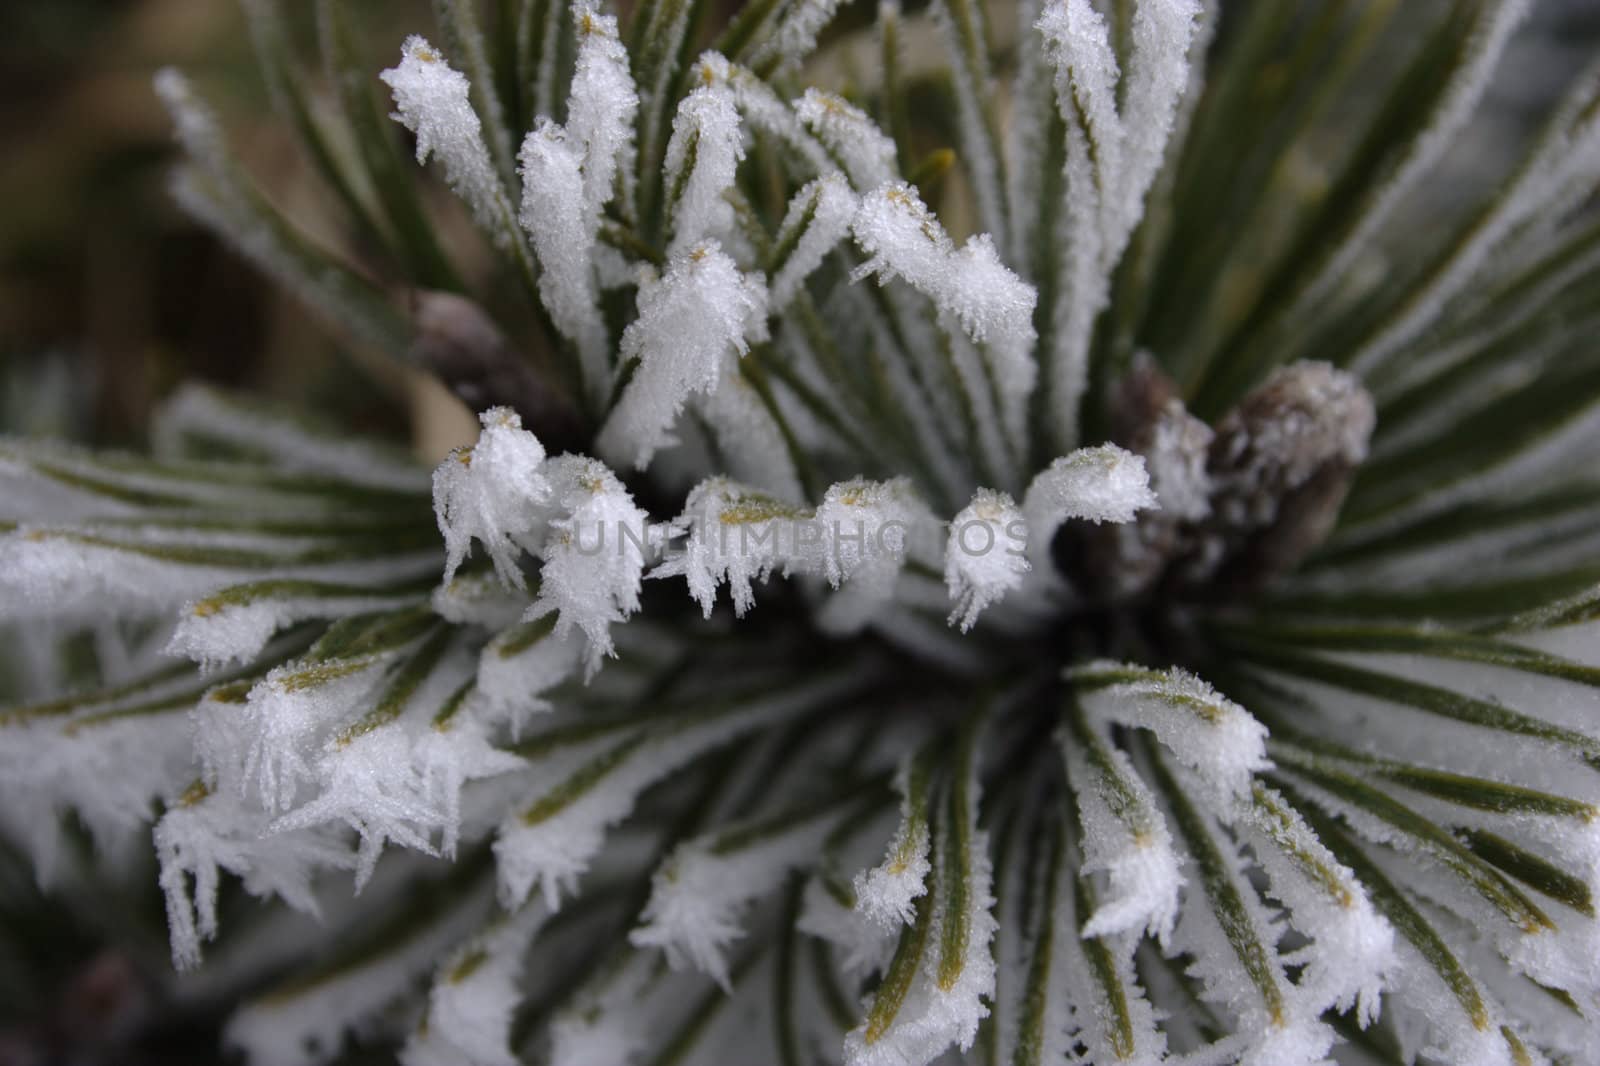 conifer needles dressed in needles of the hoar frost